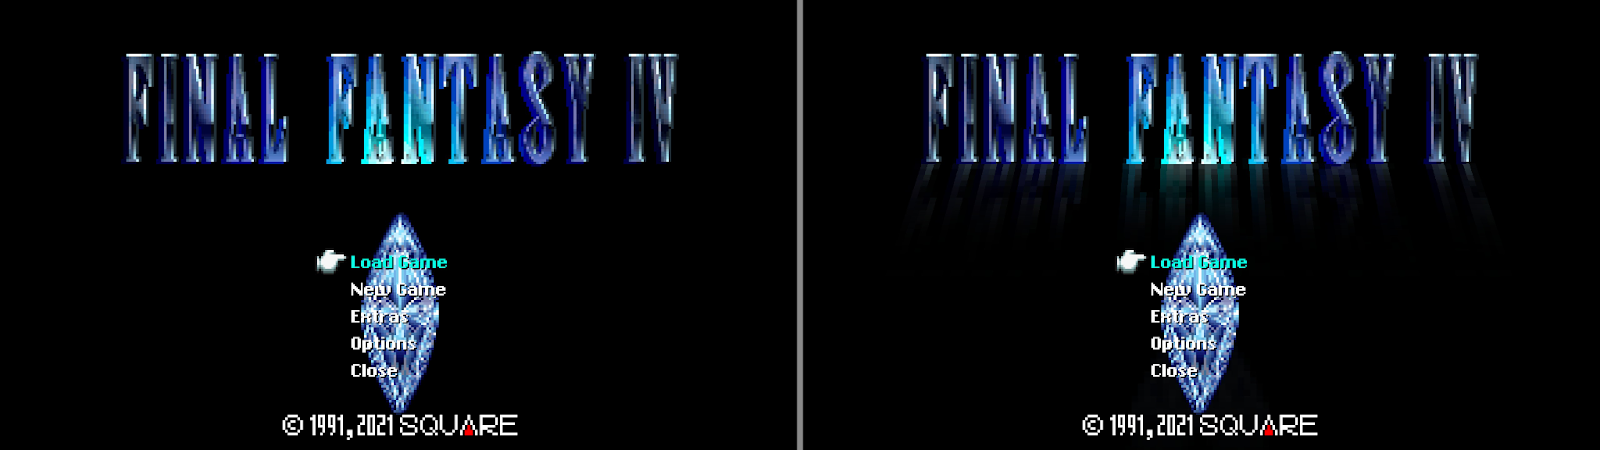 FF4: Complete Modding Guide and Index image 223